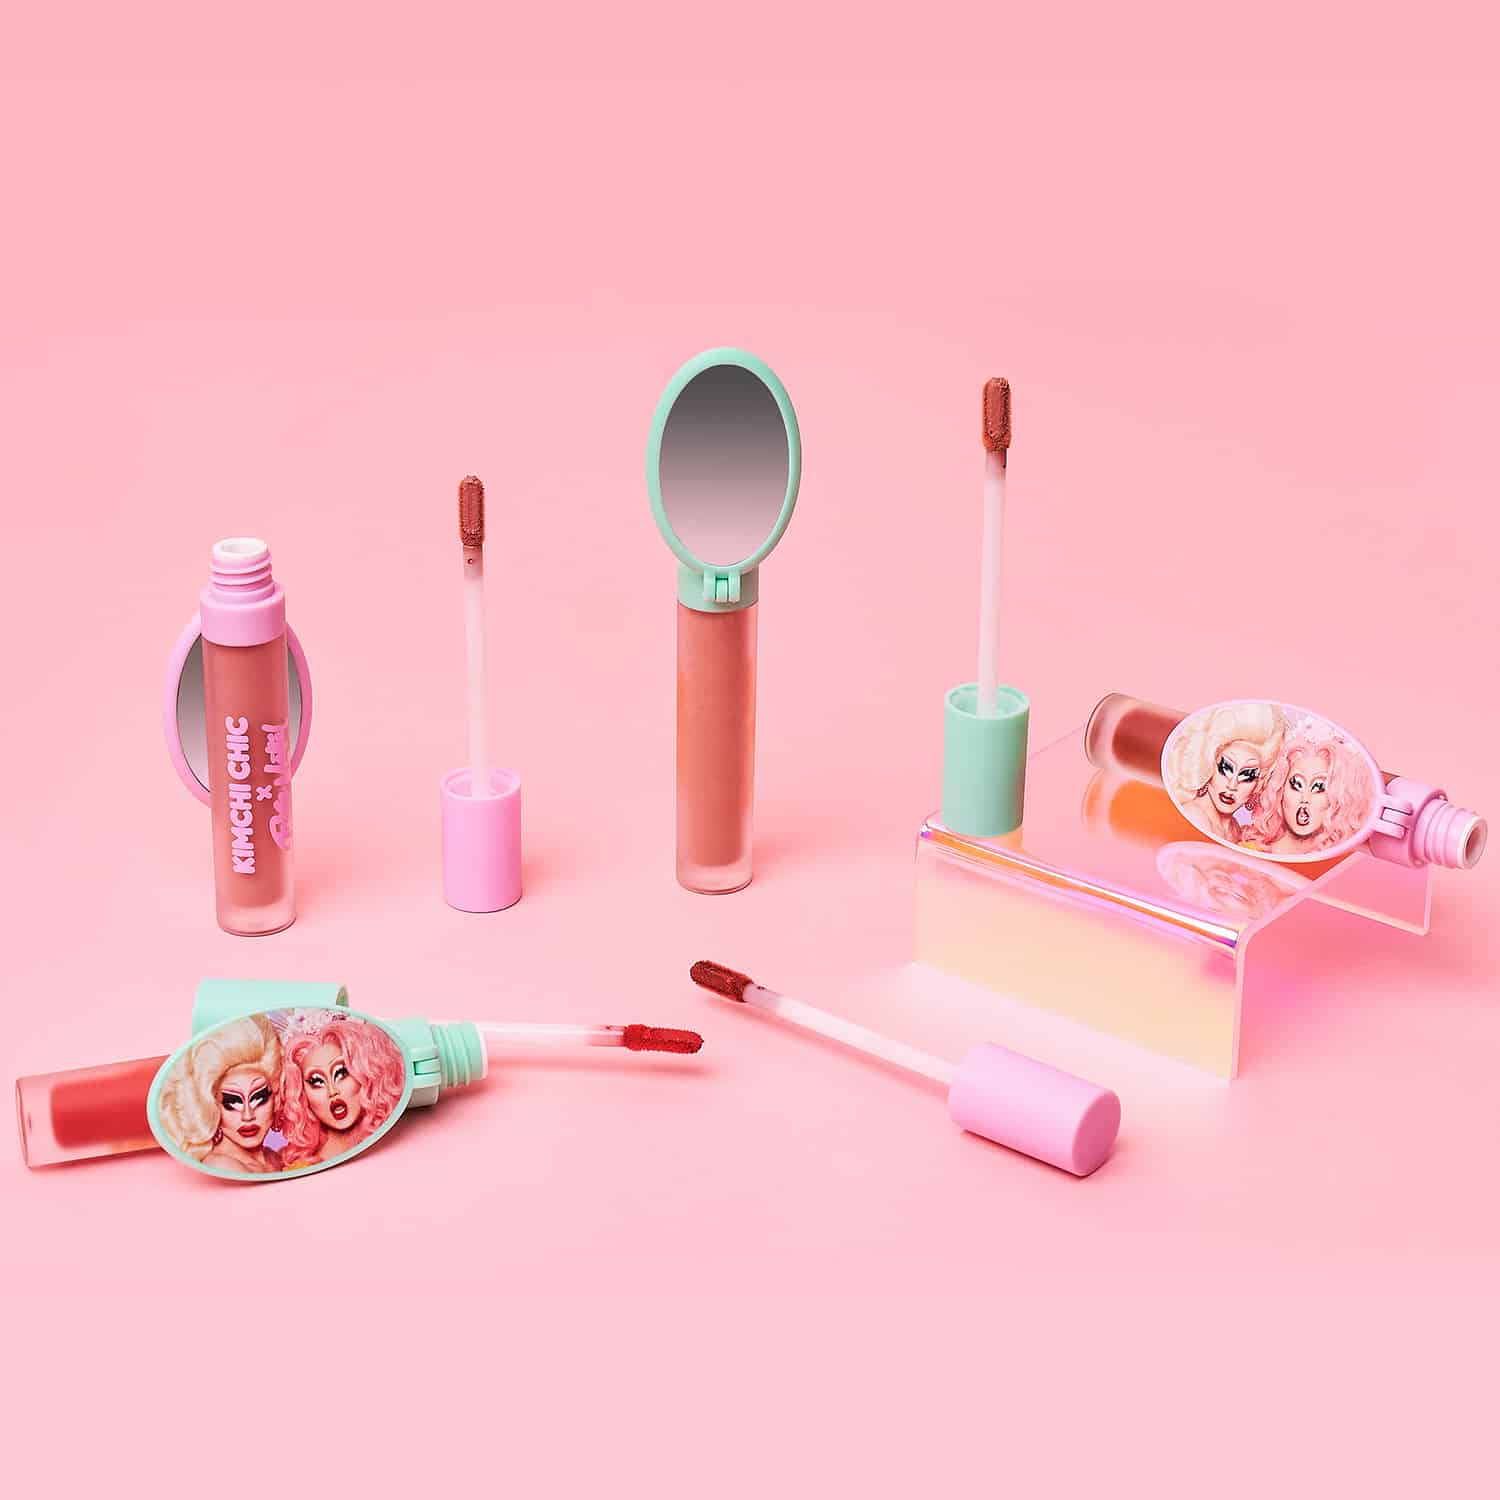 The limited edition collection by Kimchi x Trixie features 12 makeup products.